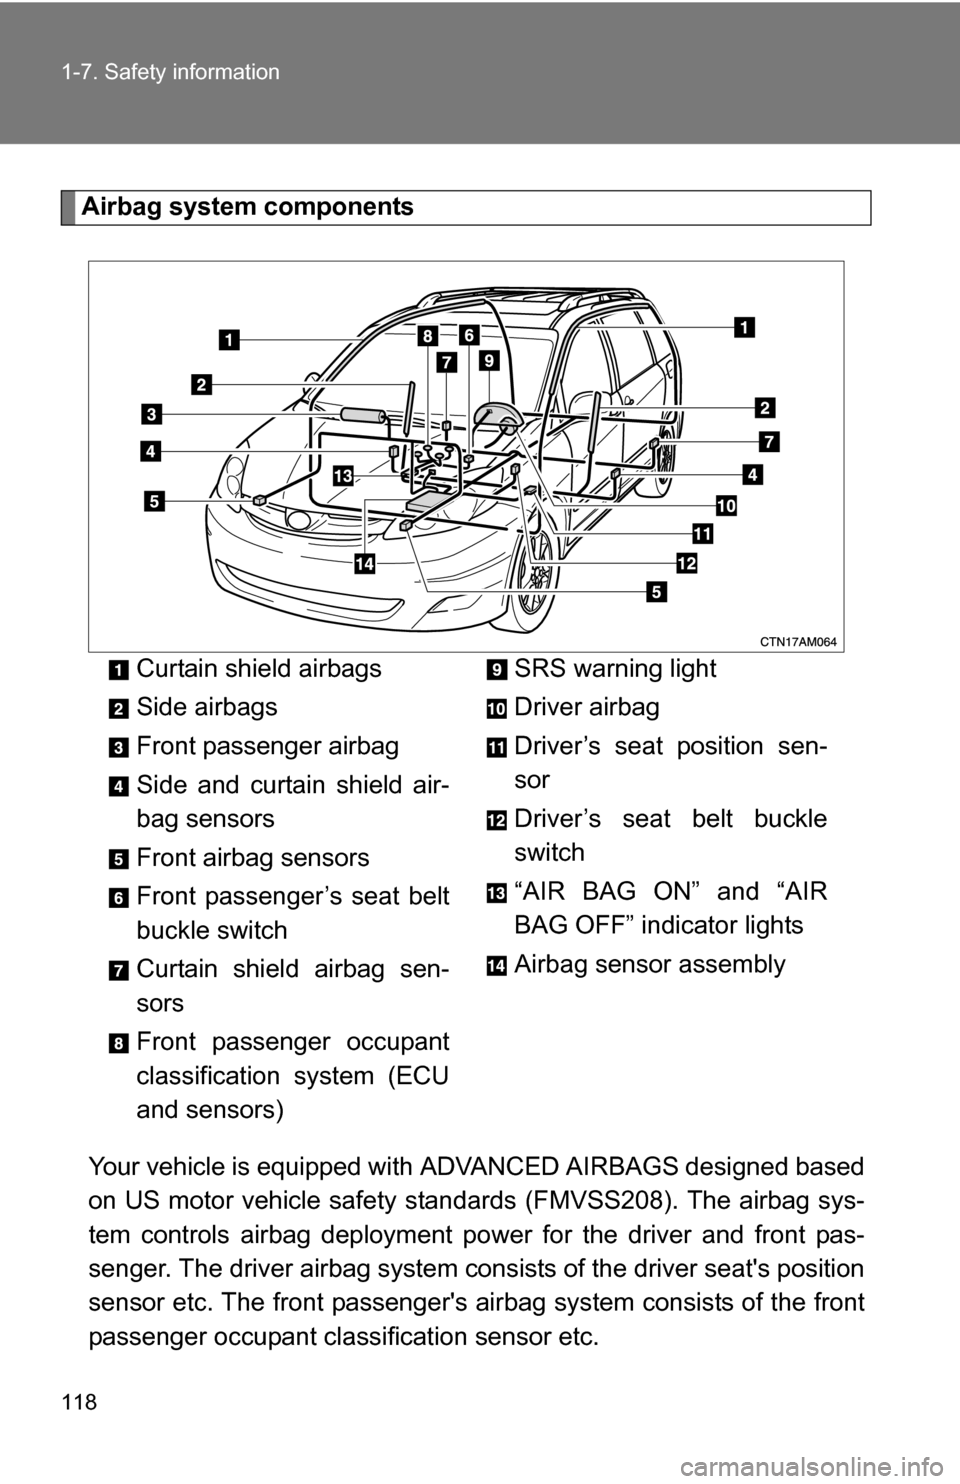 TOYOTA SIENNA 2009 XL20 / 2.G Owners Manual 118 1-7. Safety information
Airbag system componentsYour vehicle is equipped with  ADVANCED AIRBAGS designed based
on US motor vehicle safety standards (FMVSS208). The airbag sys-
tem controls airbag 